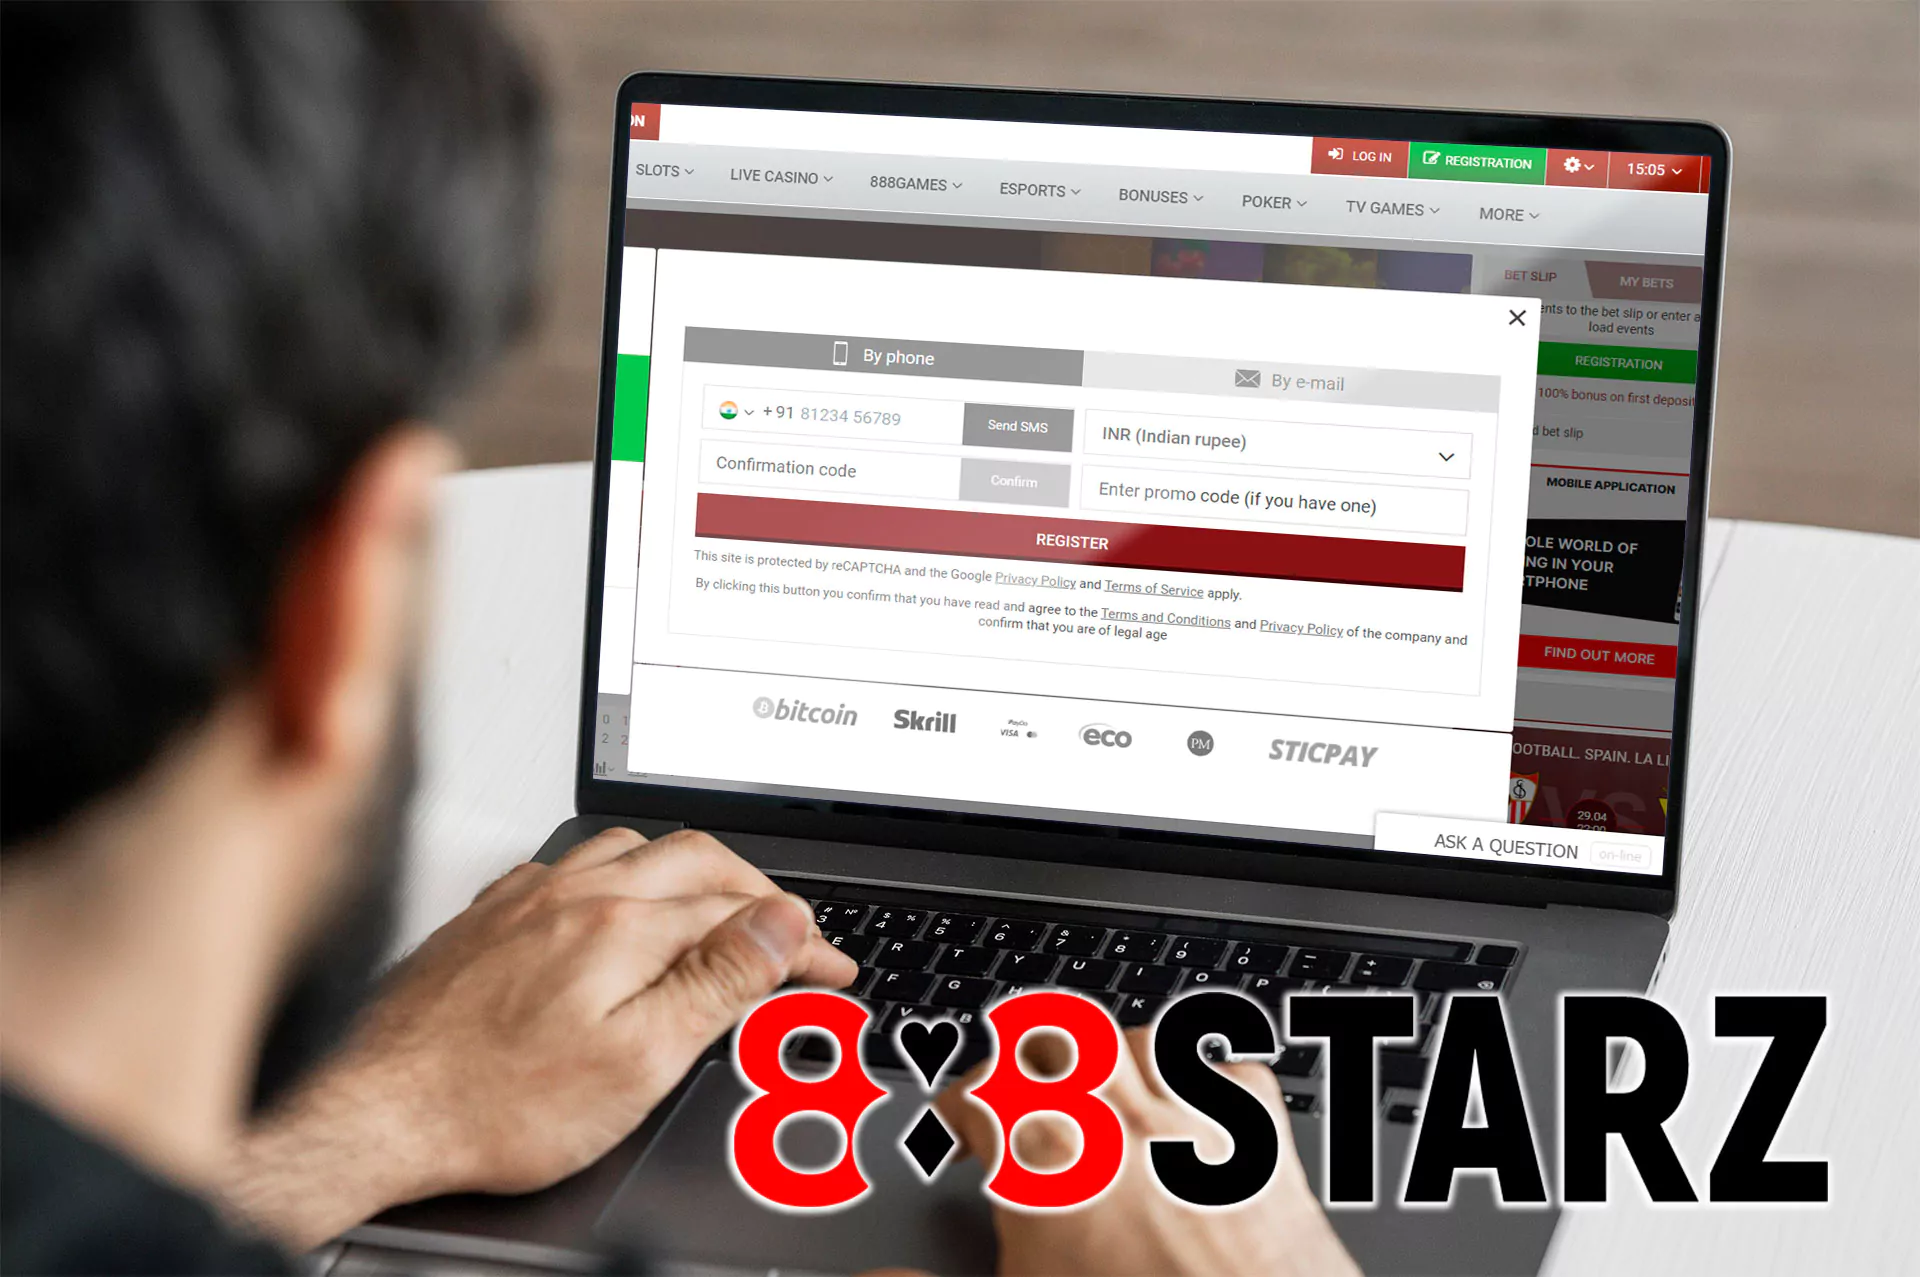 Sign up for 888starz.